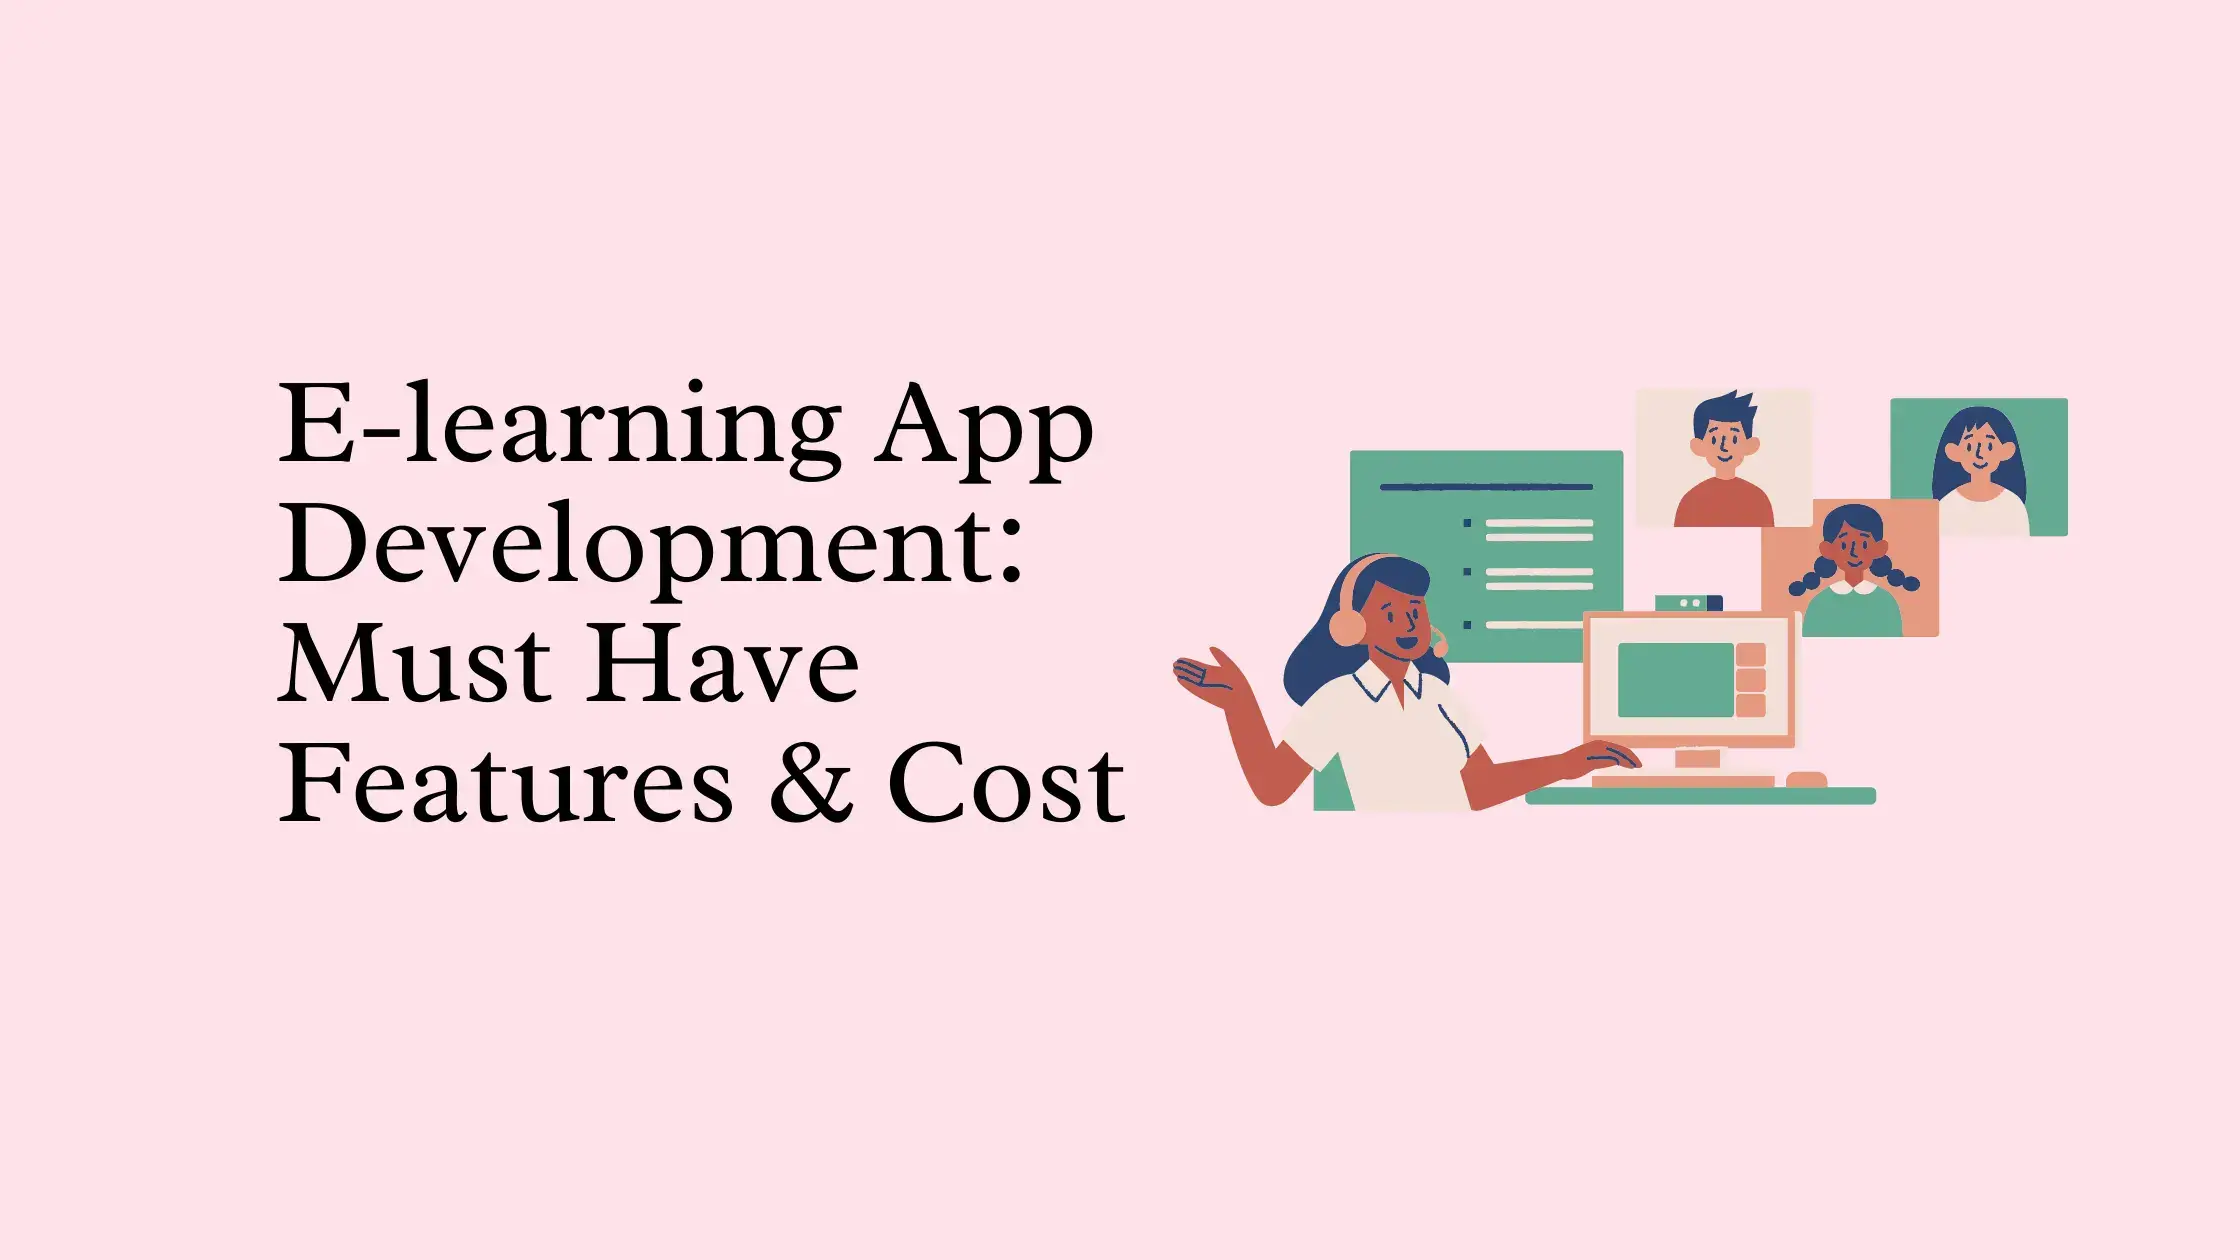 E-learning-App-Development-Must-Have-Features-Cost